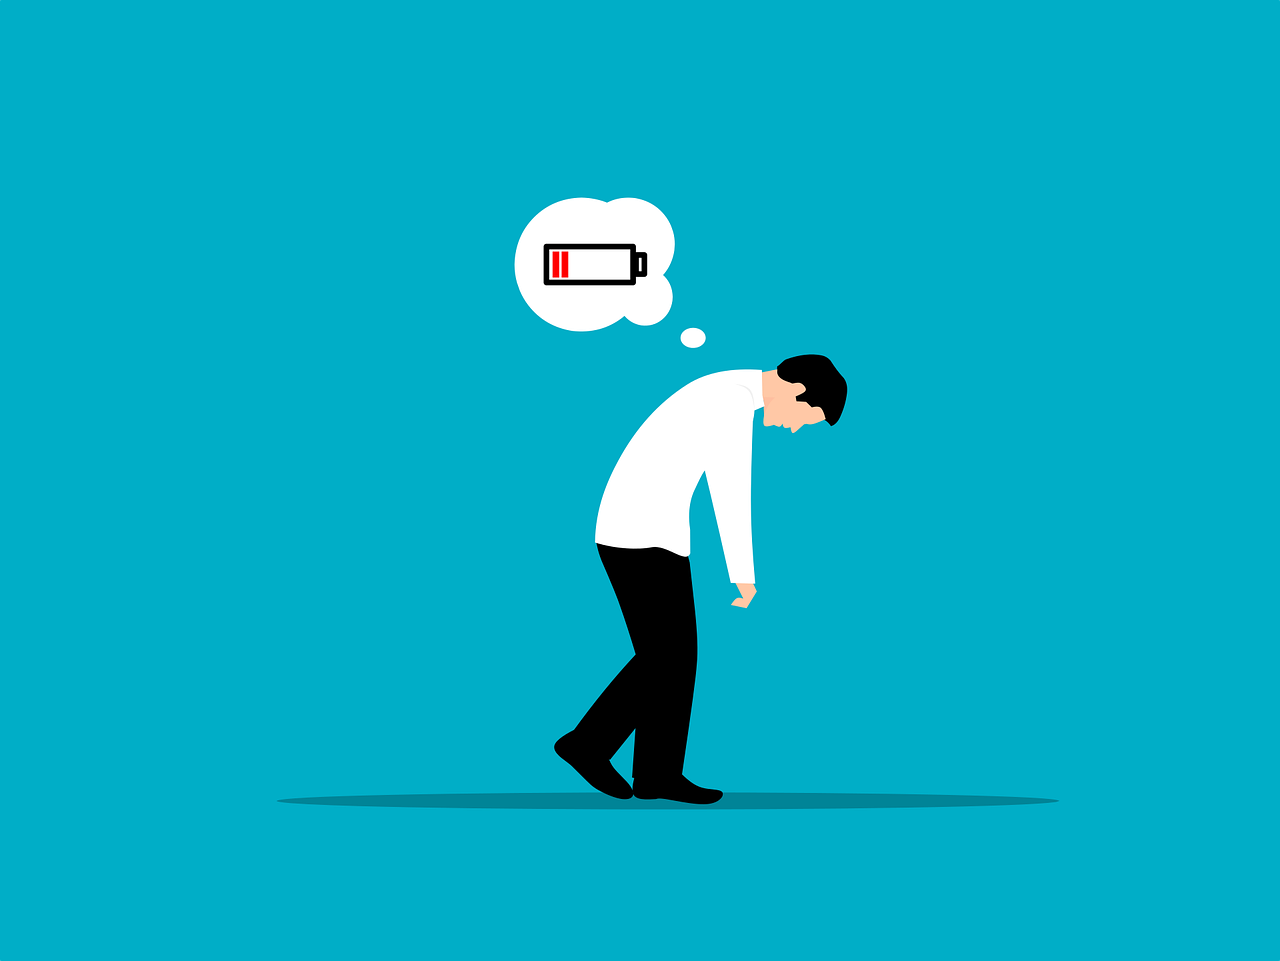 Vector graphic of tired person walking with low battery symbol above them